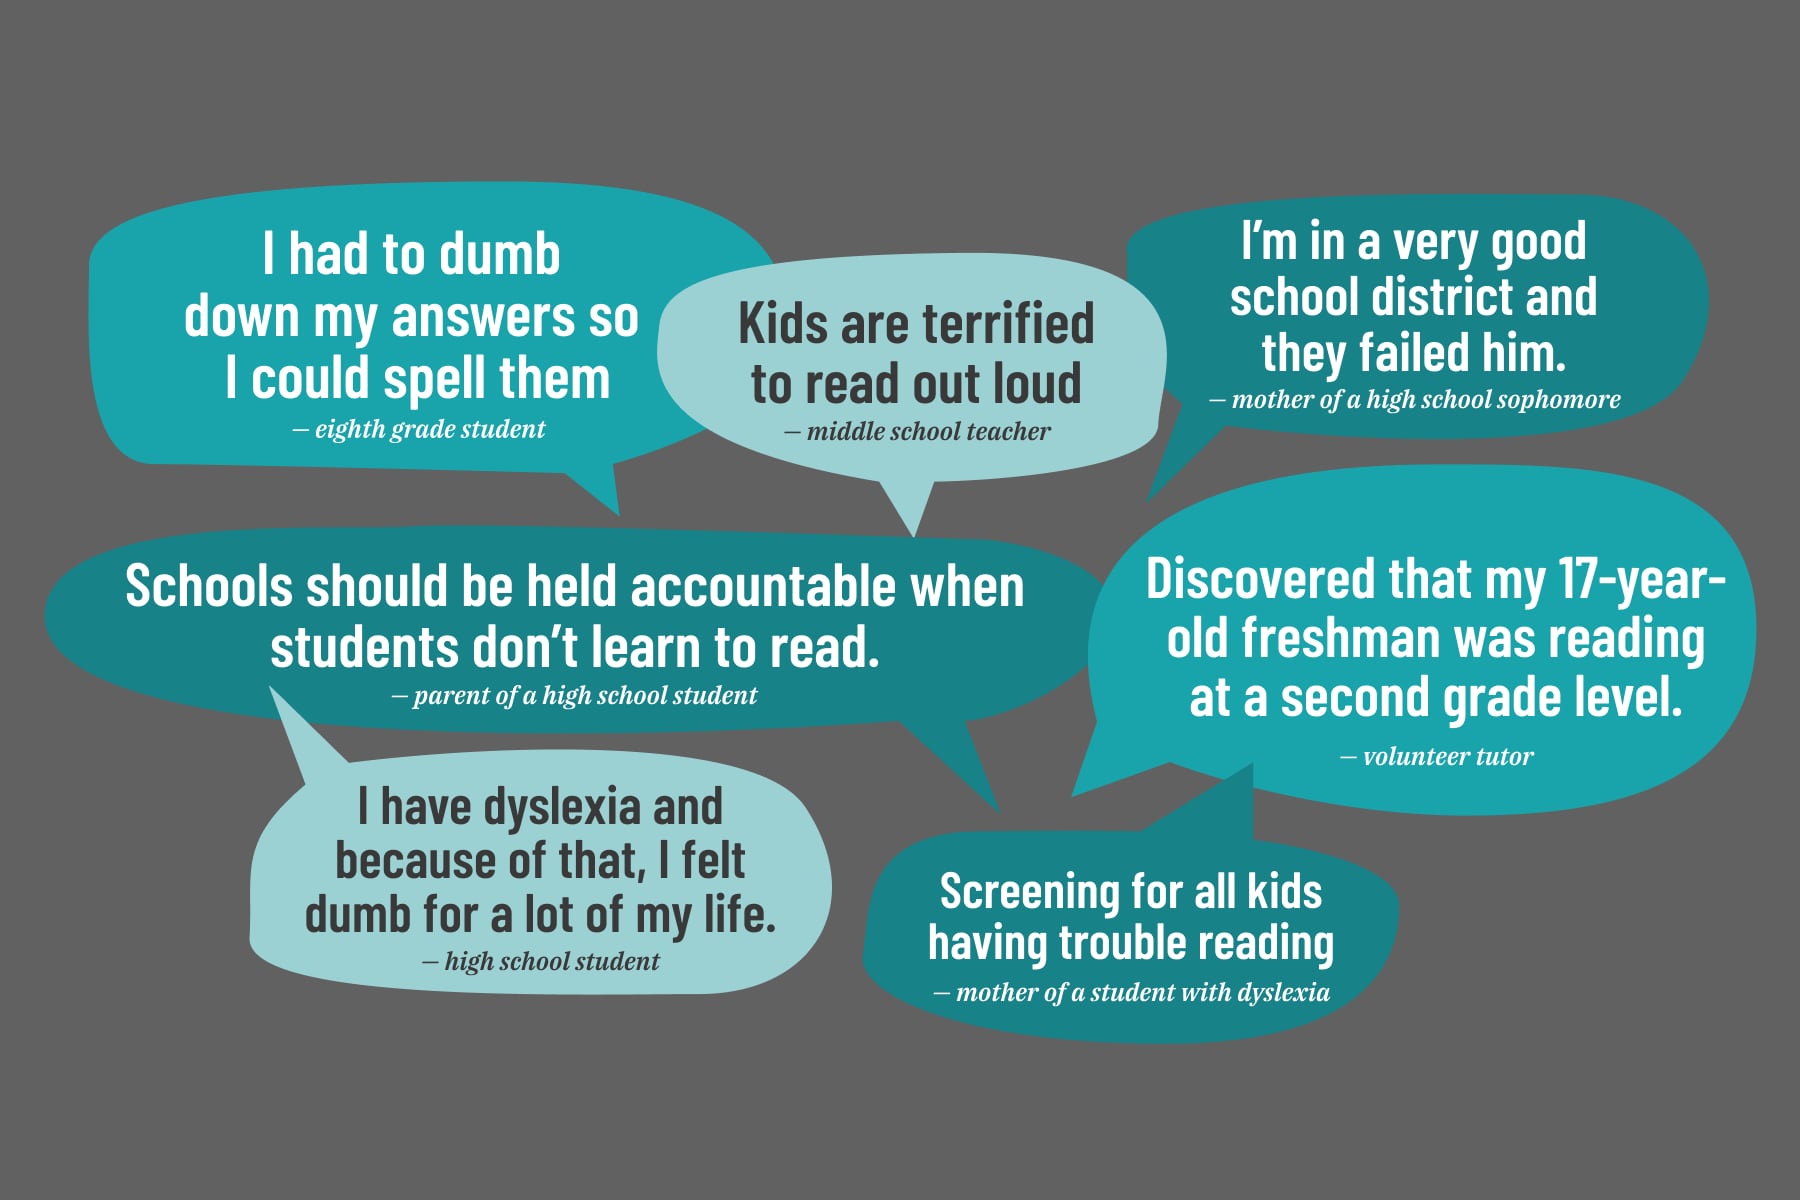 Quotes from various reader responses including perspectives from students, teachers, parents, and tutors.